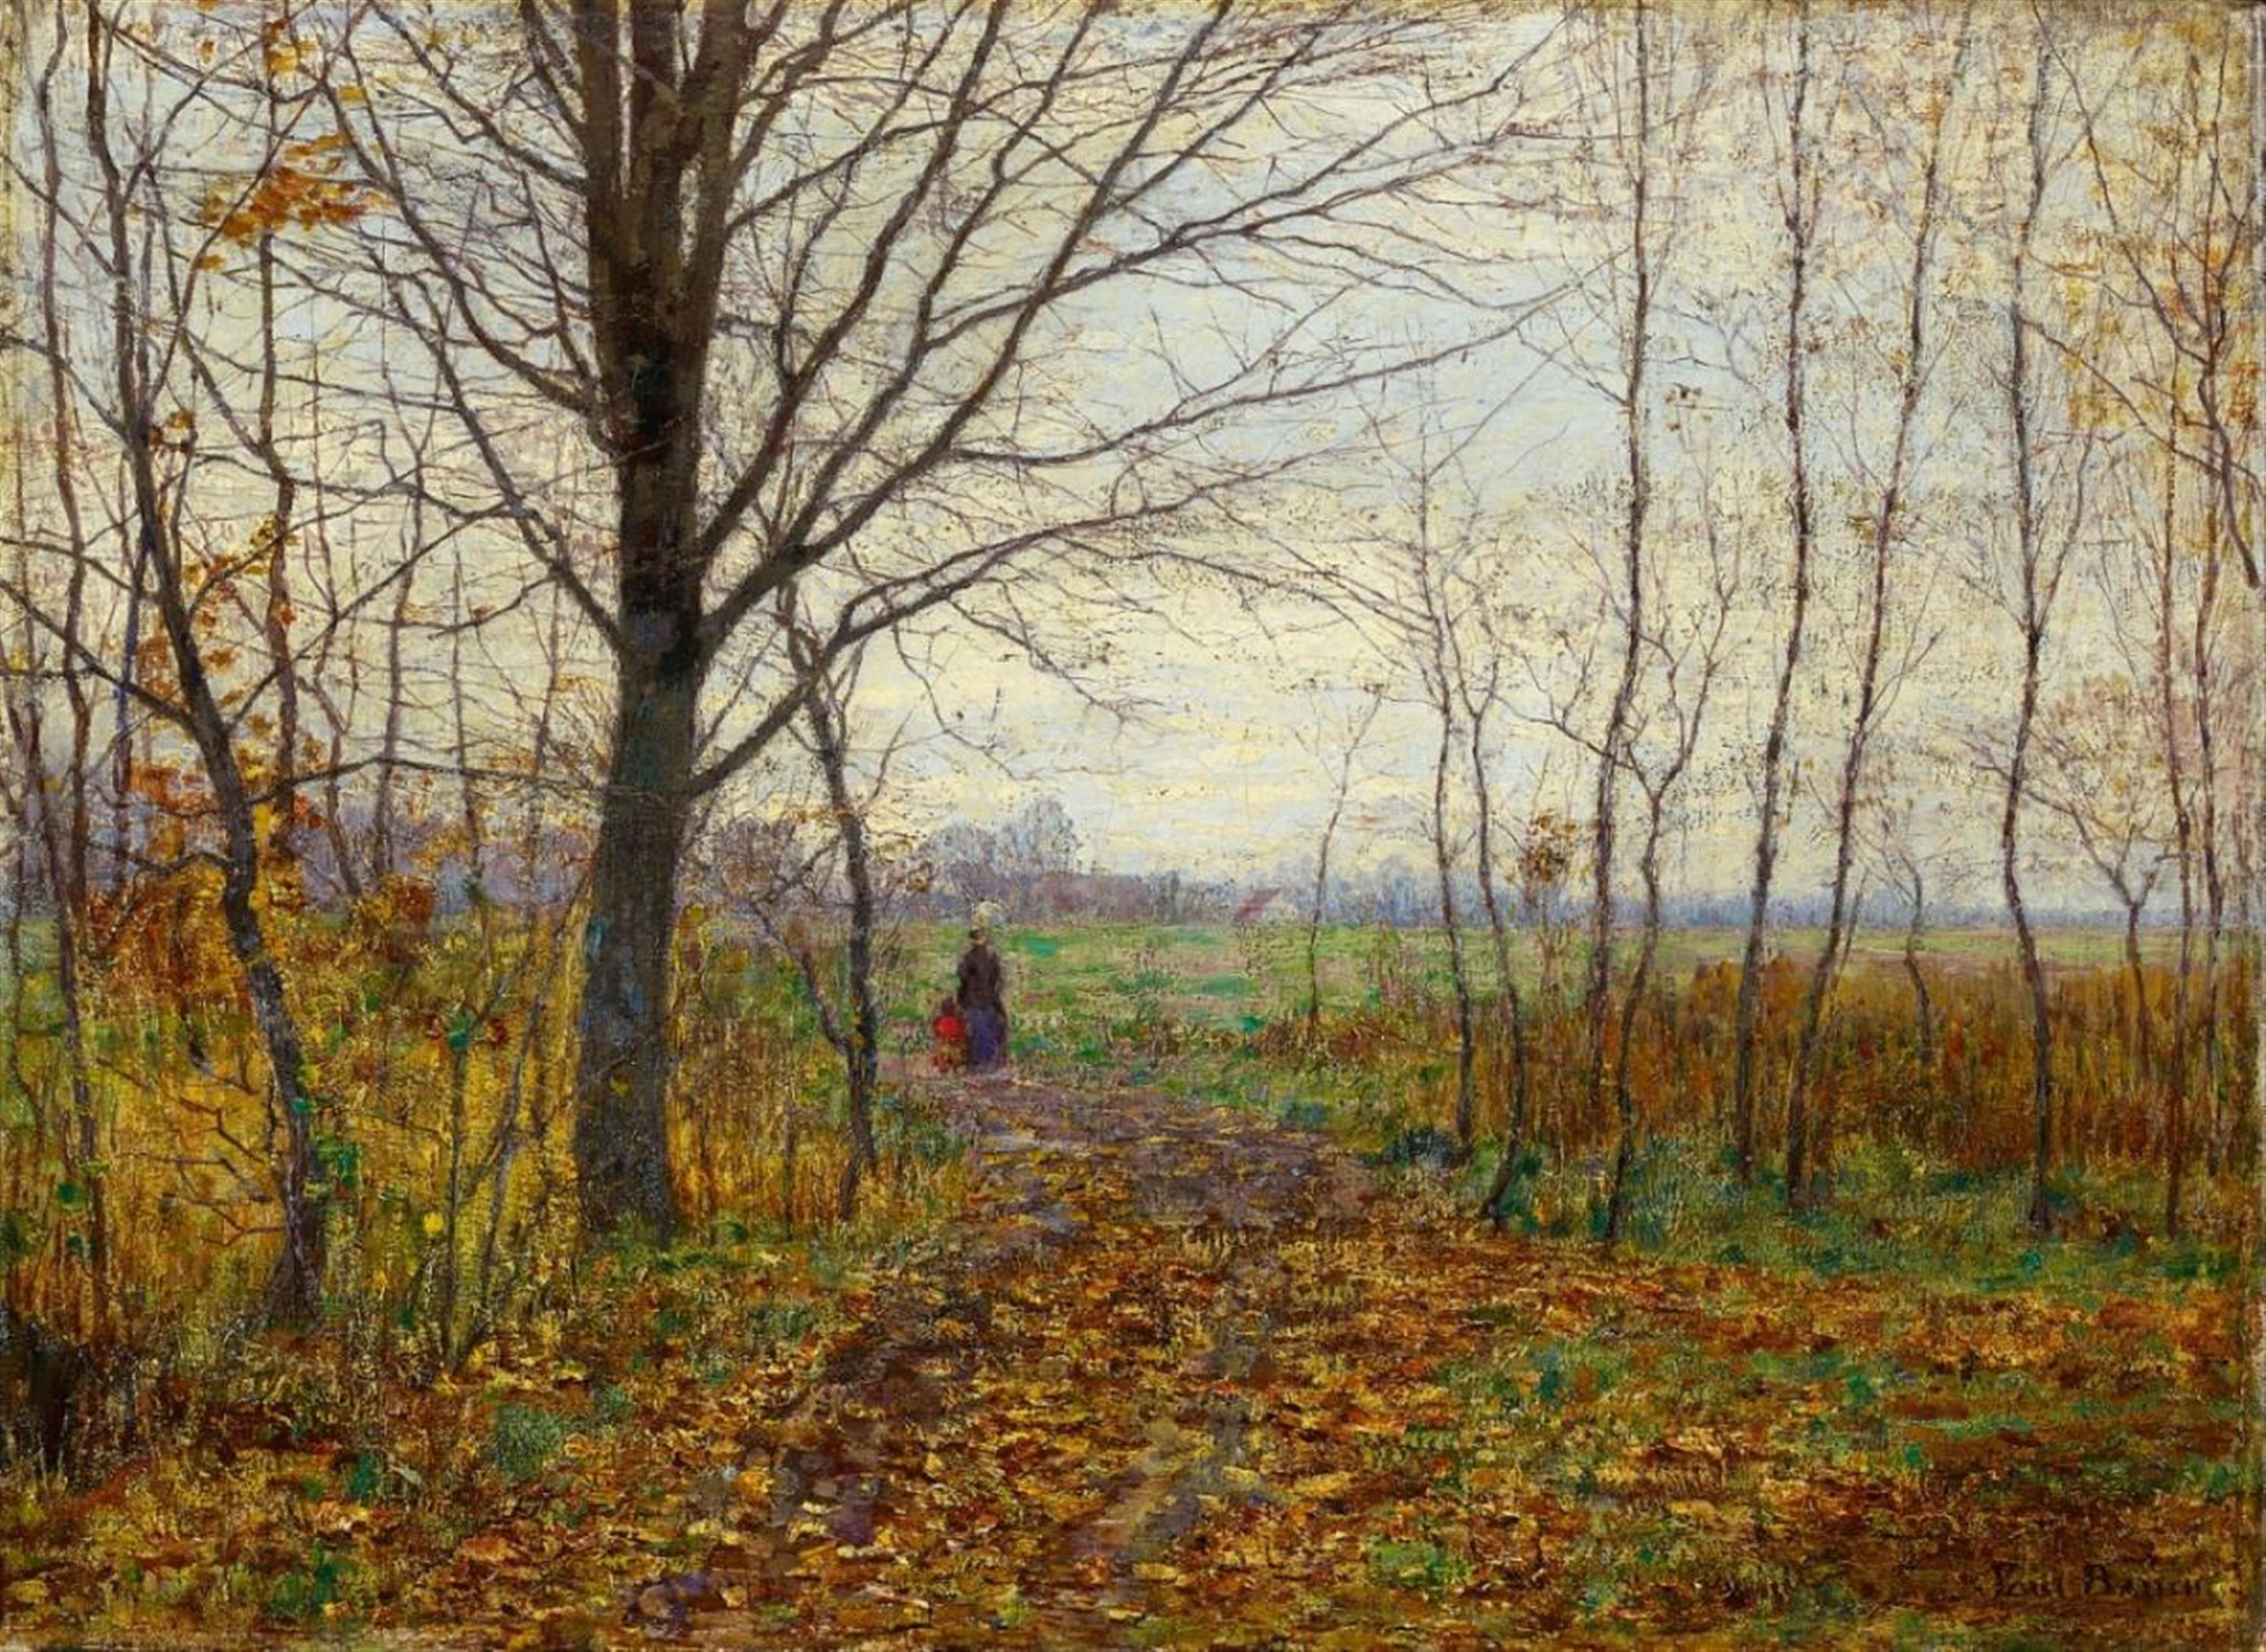 Paul Baum - Blick aus Waldrand auf Vorfrühlingswiesen, mit Frau und Kind, die aus dem Wald gehen (View from the Edge of a Wood to early Spring Meadows, with Woman and Child walking out of the Wood) - image-1